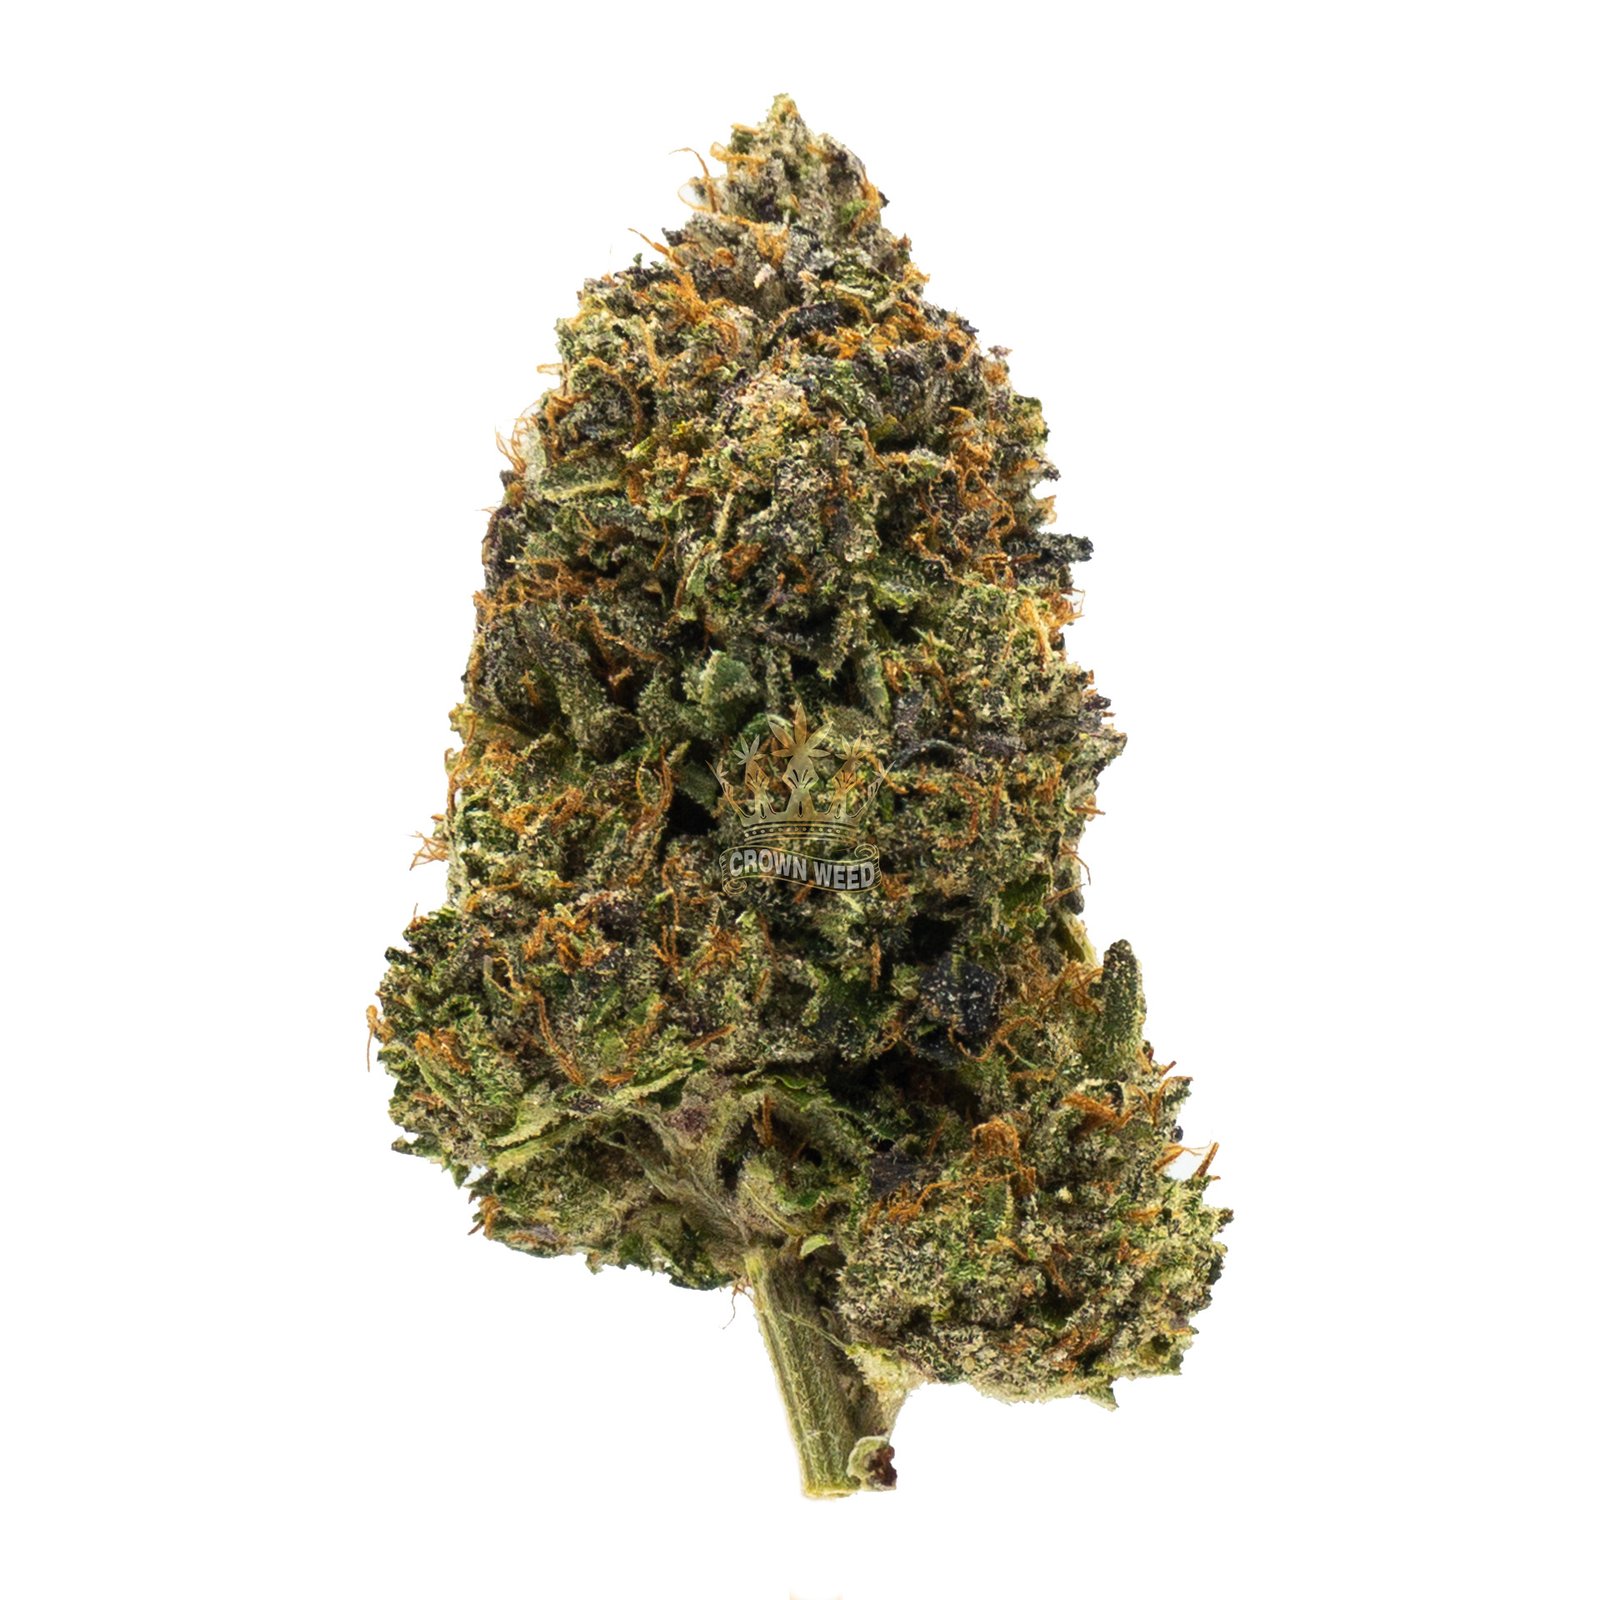 Death bubba weed for delivery in toronto